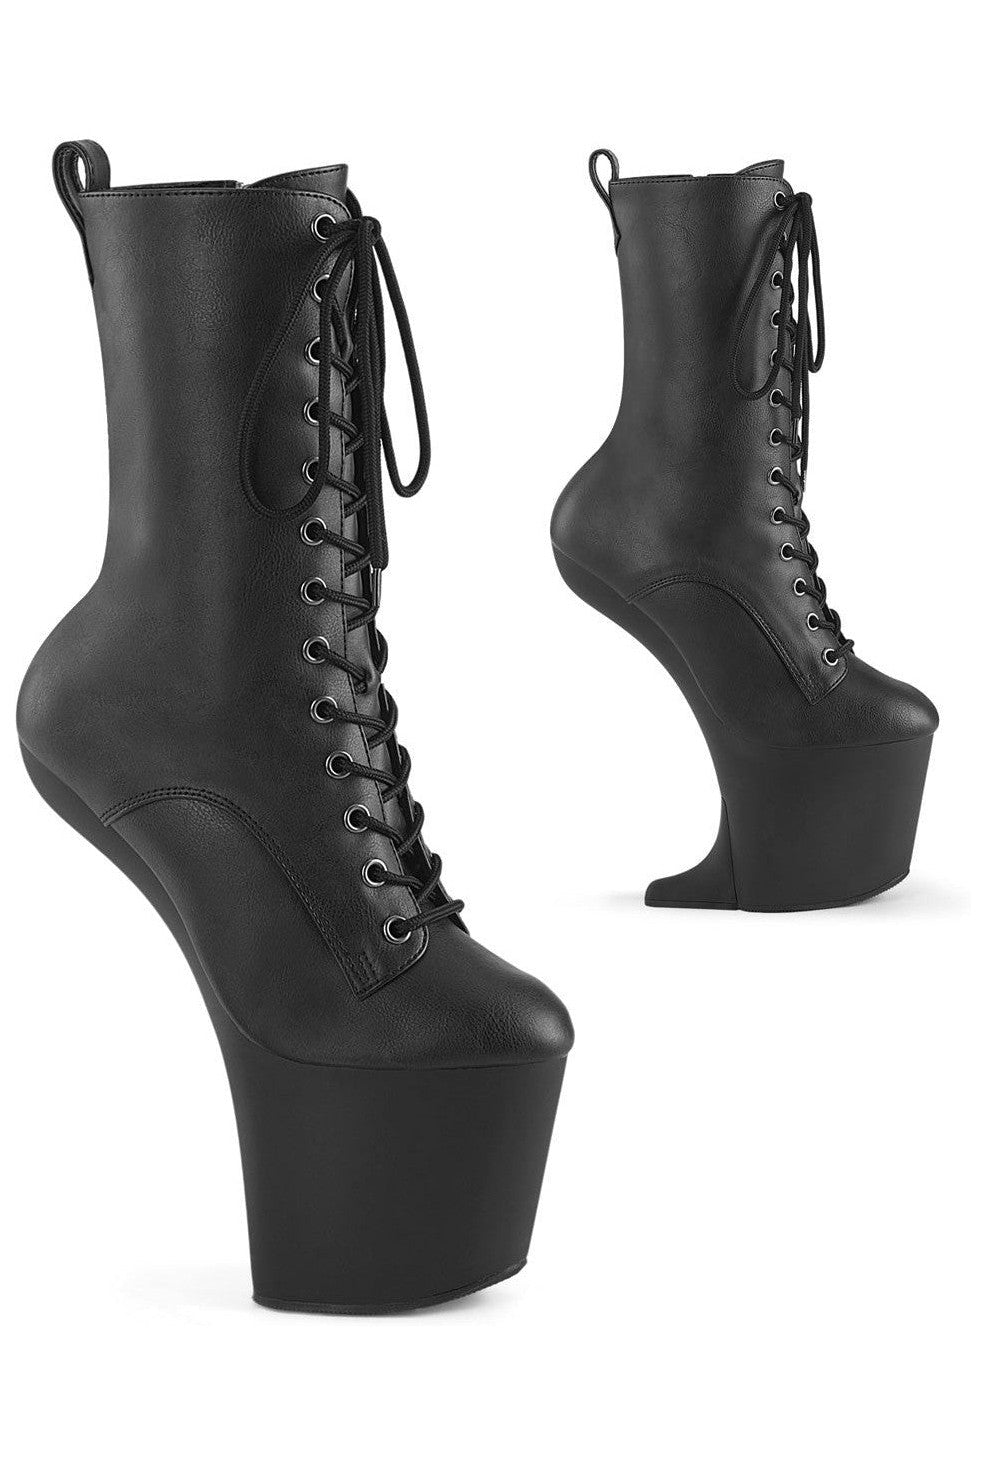 CRAZE-1040 Black Faux Leather Ankle Boot-Ankle Boots- Stripper Shoes at SEXYSHOES.COM